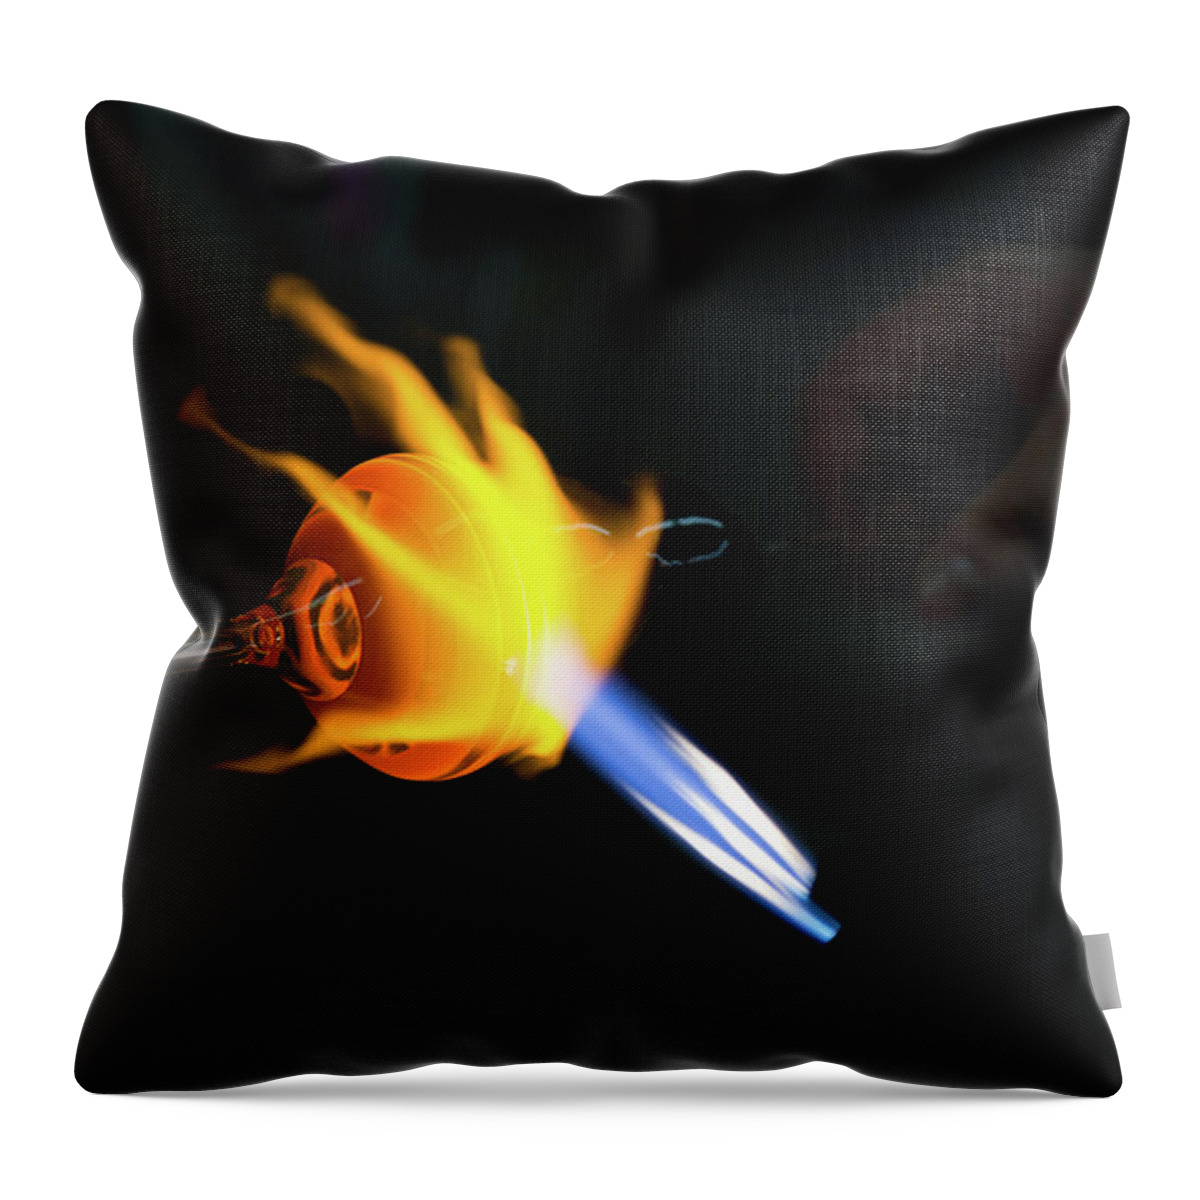 Fire Throw Pillow featuring the photograph Fire Hand by Digiblocks Photography